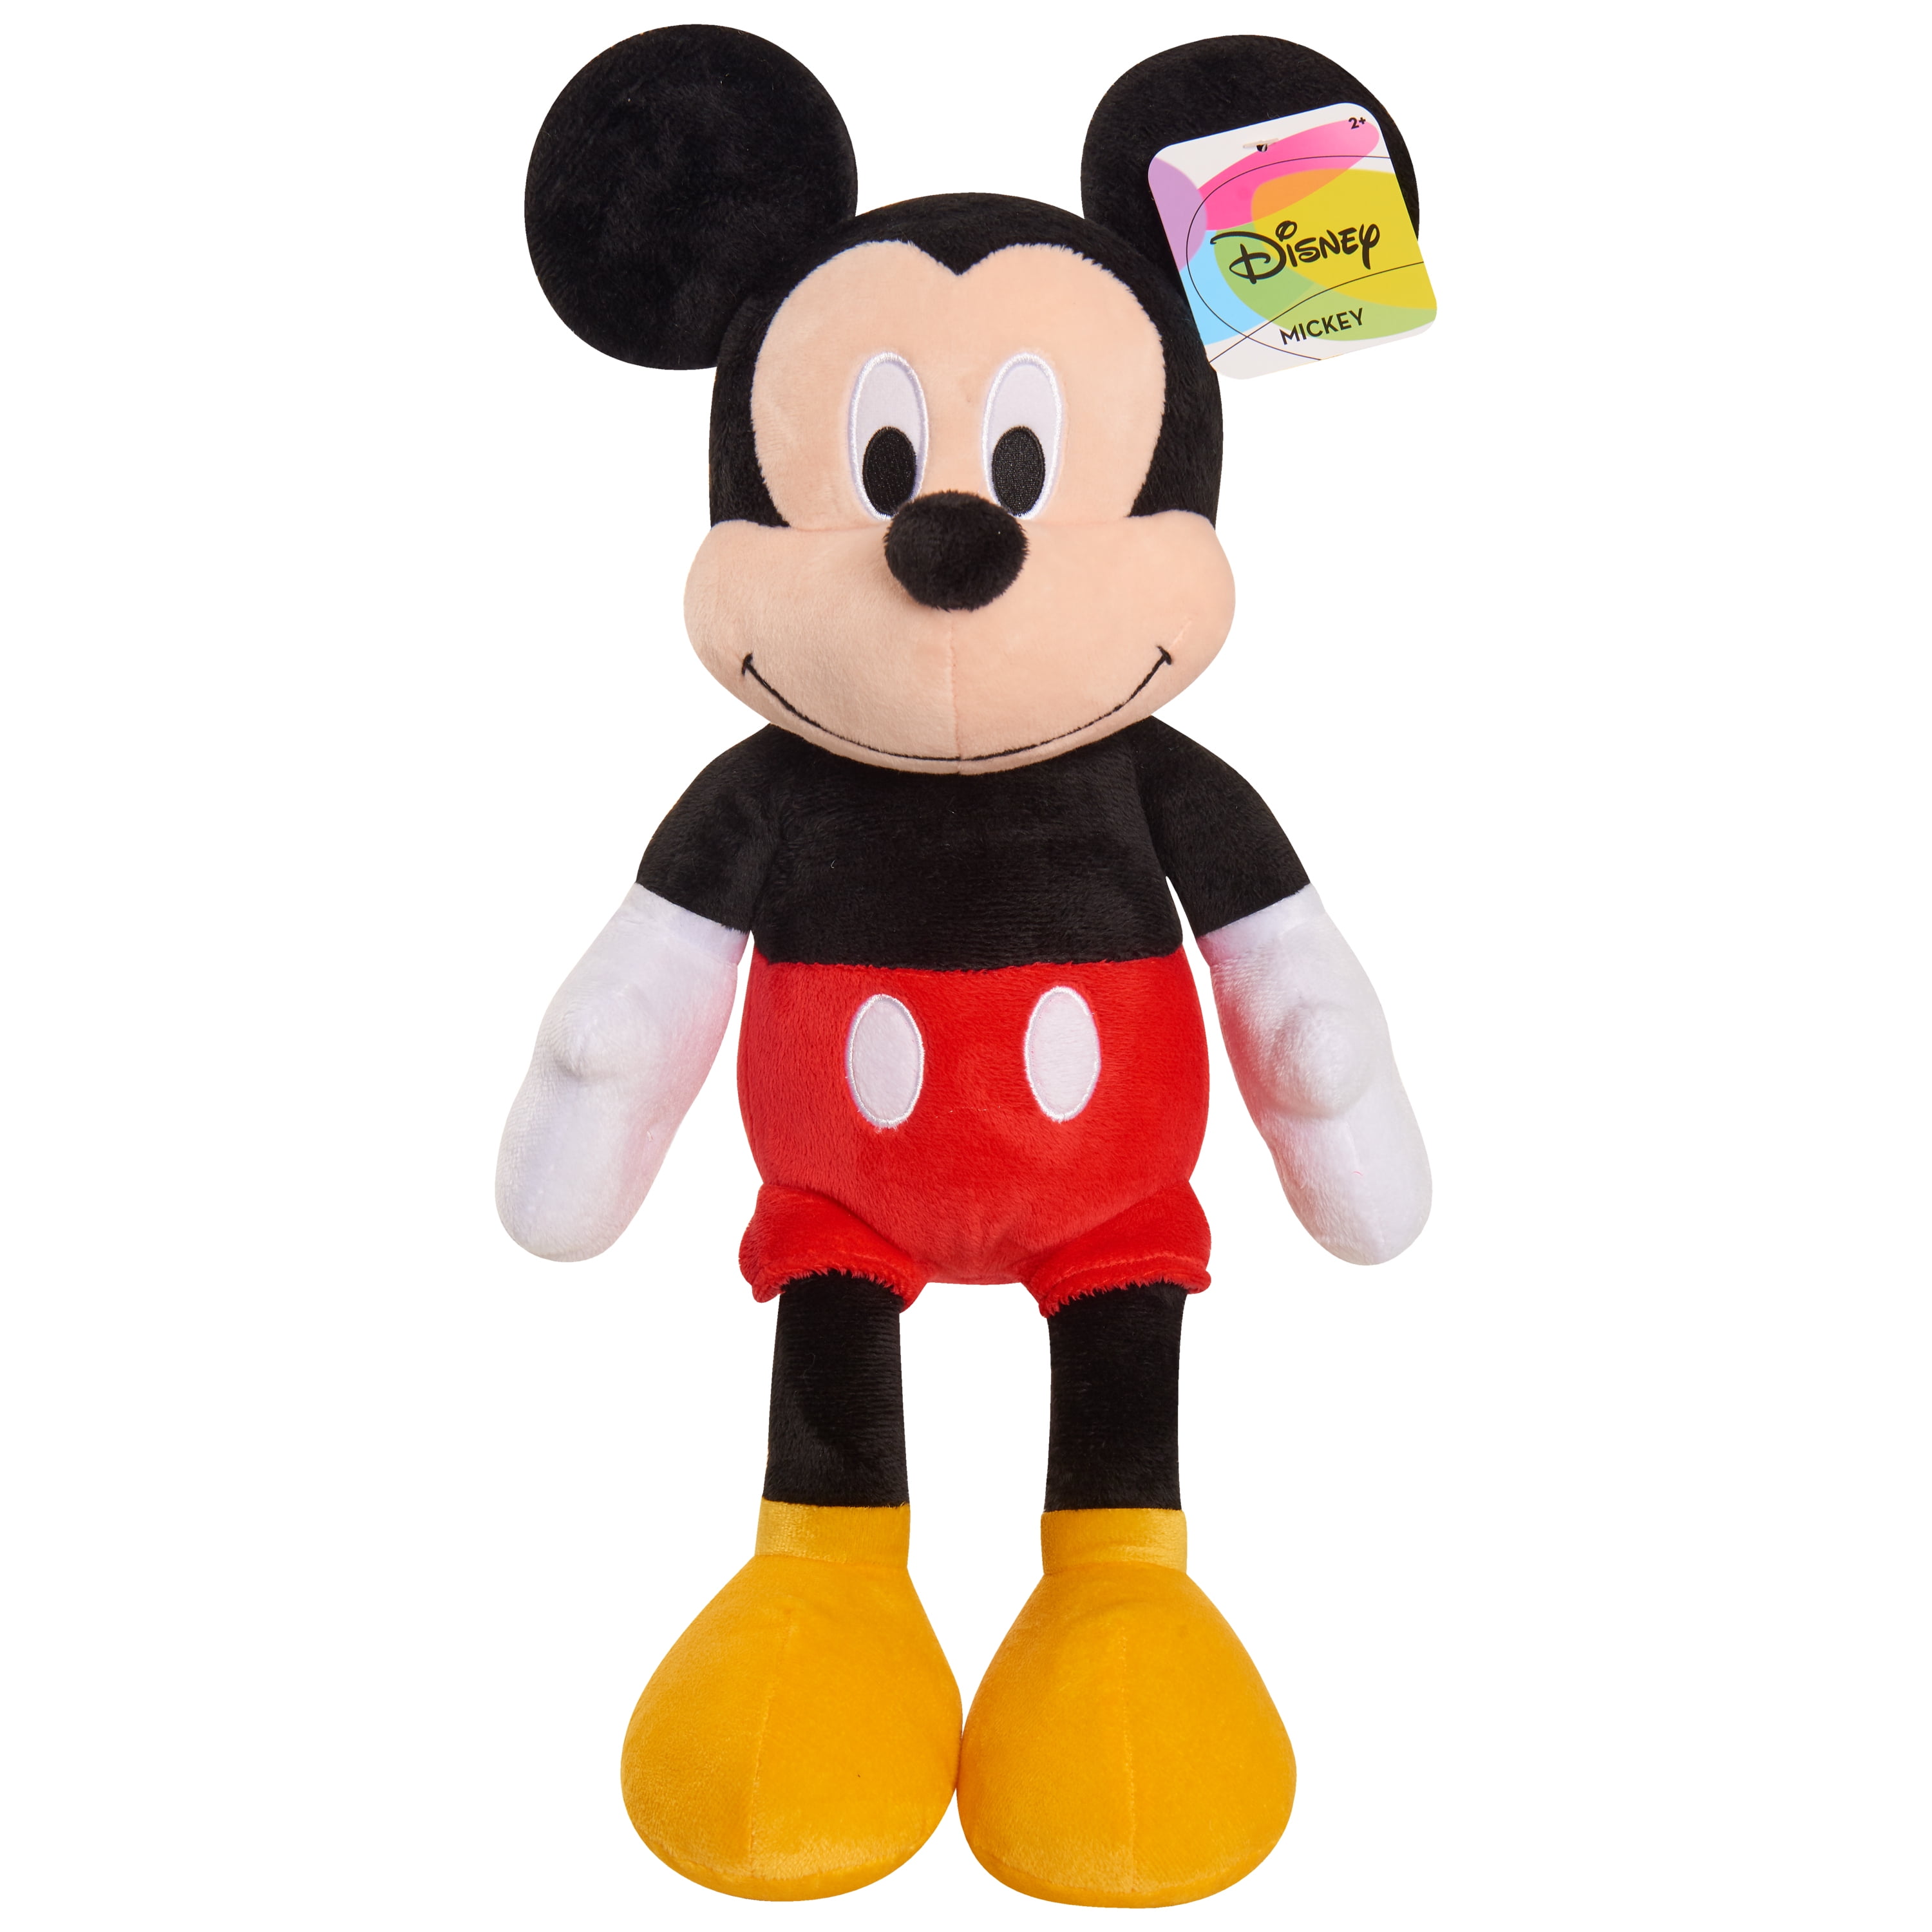 Disney Mickey Mouse 19-inch Plush Stuffed Animal, Kids Toys for